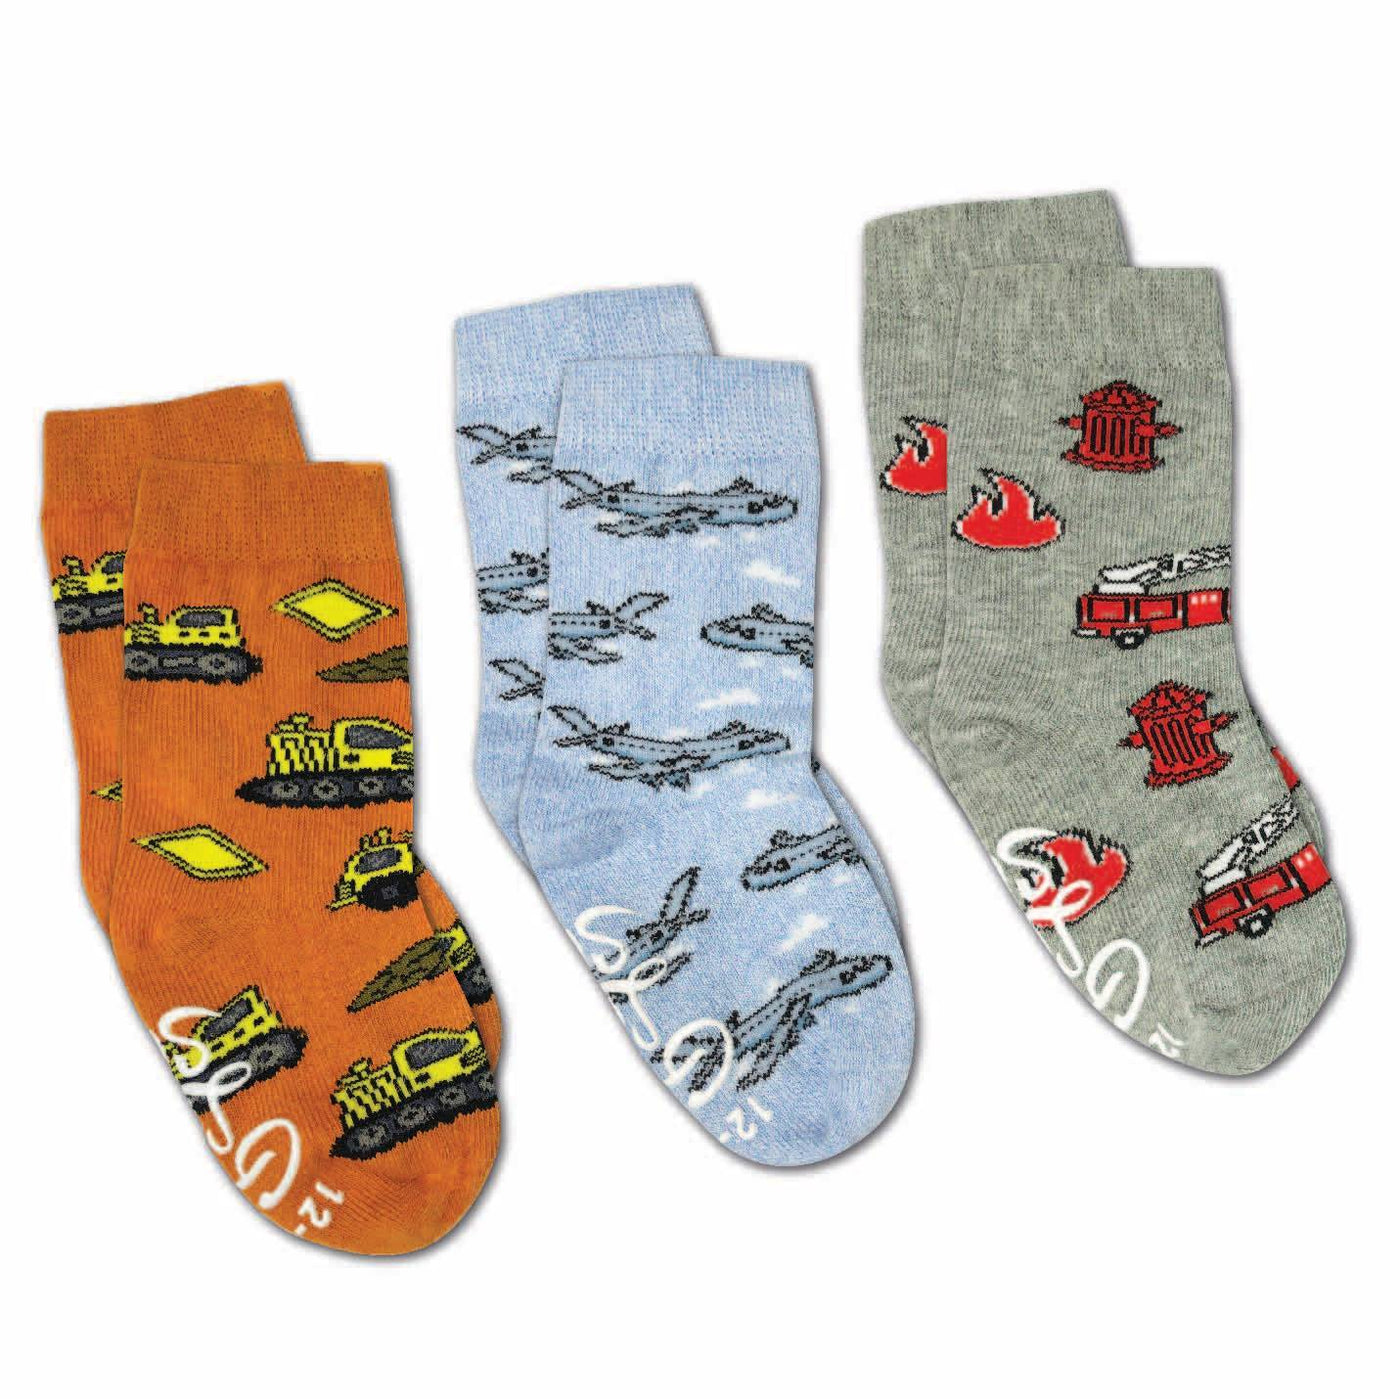 Kids "Airplane, Construction and Firefighter" Socks by Good Luck Sock